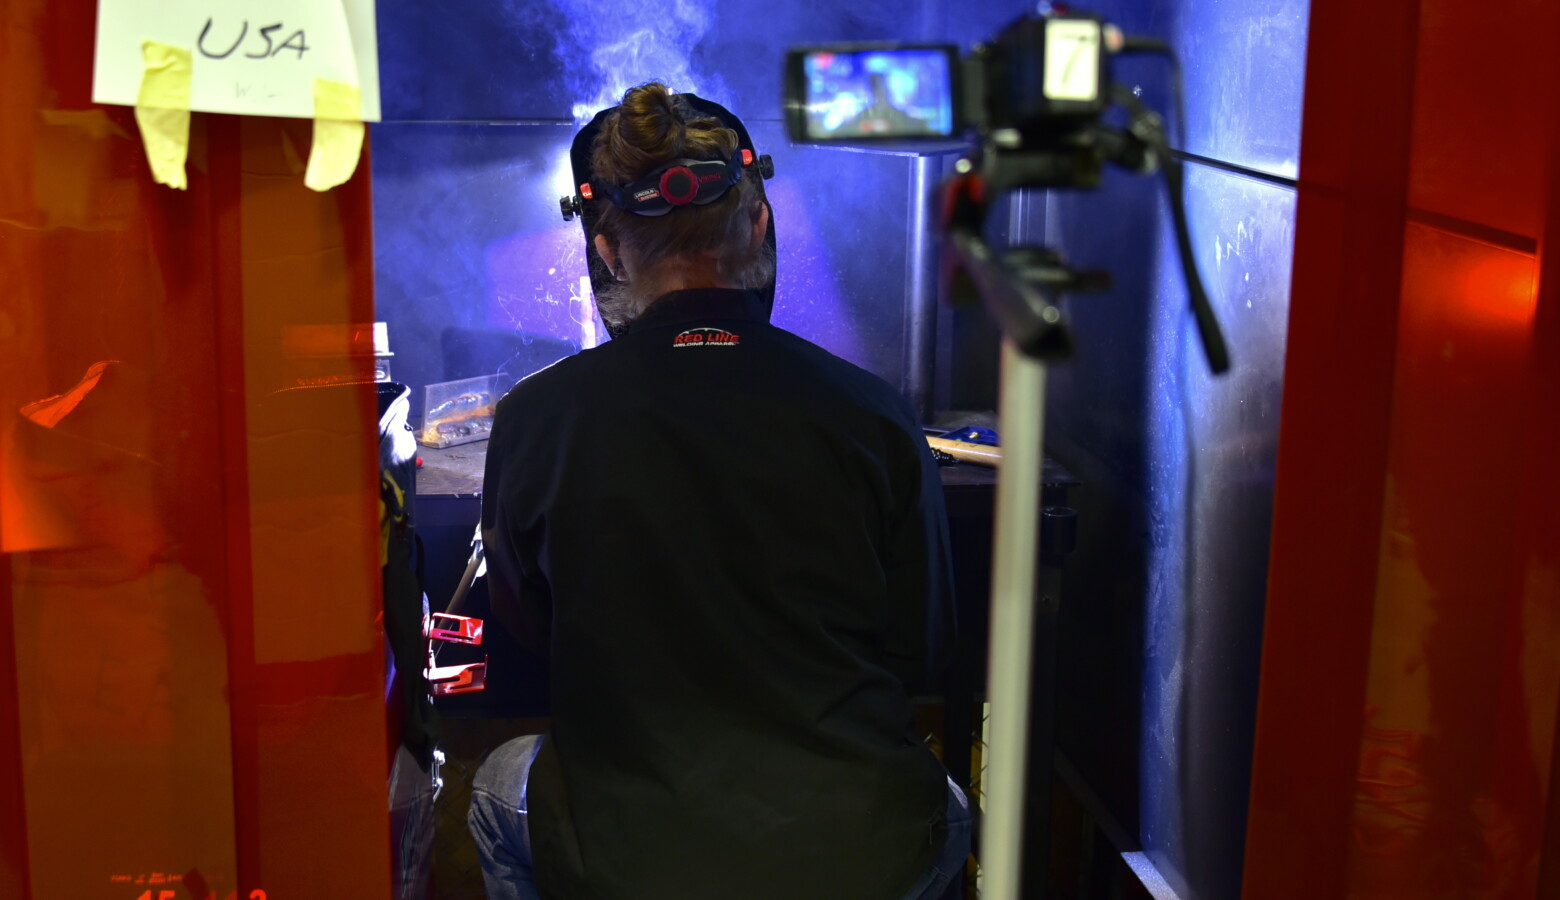 A student at the Elkhart Area Career Center welds a design for the SkillsUSA competition while being recorded on camera. (Justin Hicks/IPB News)